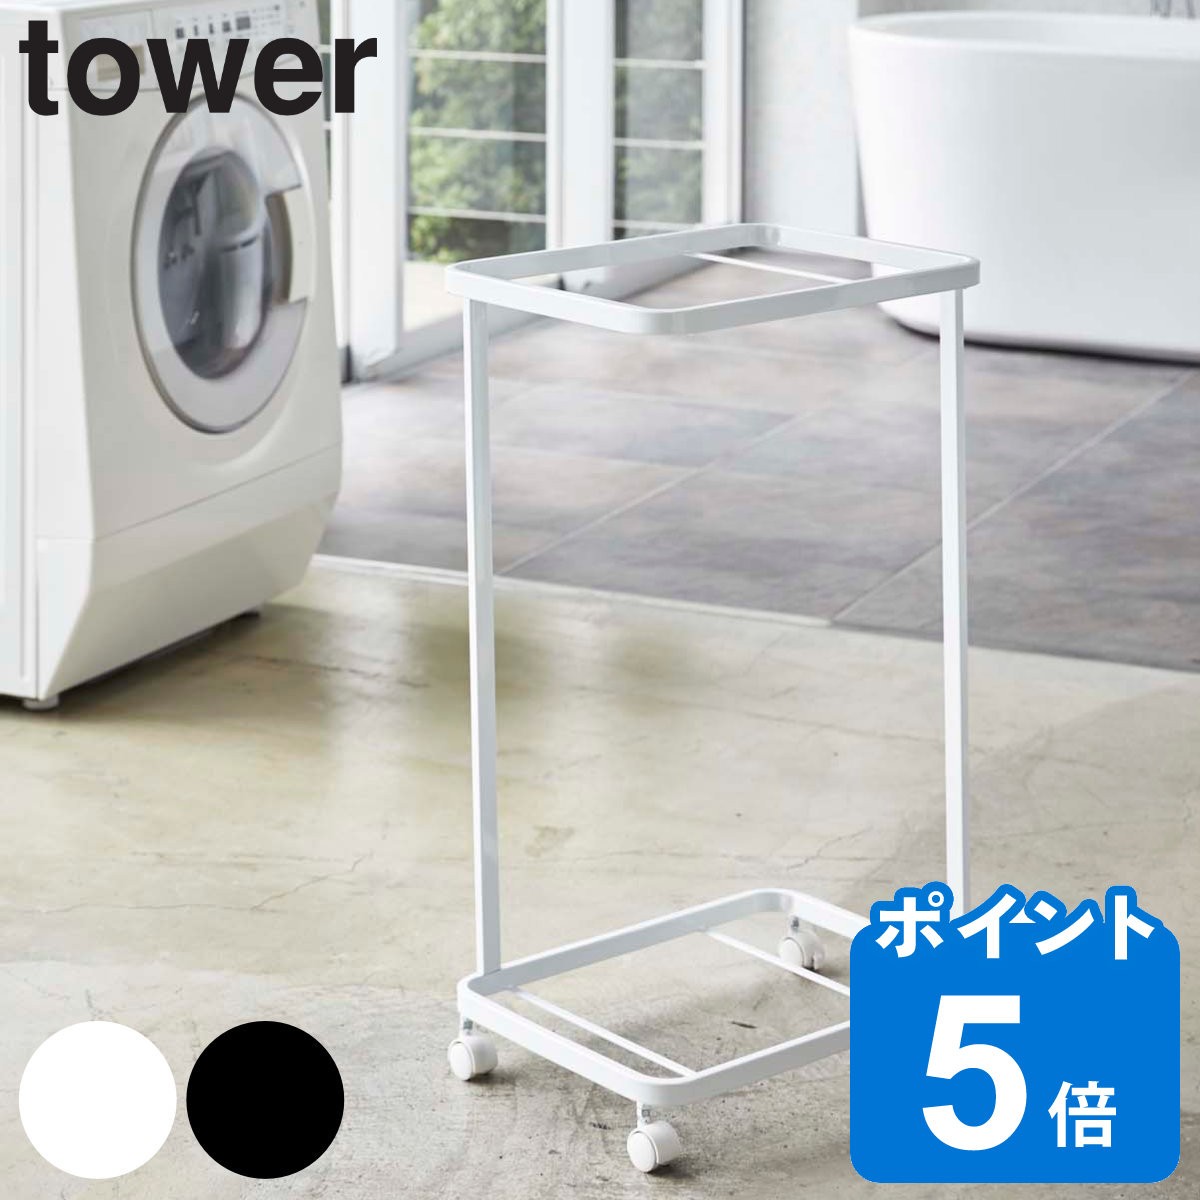 tower h[S ^[ 2i